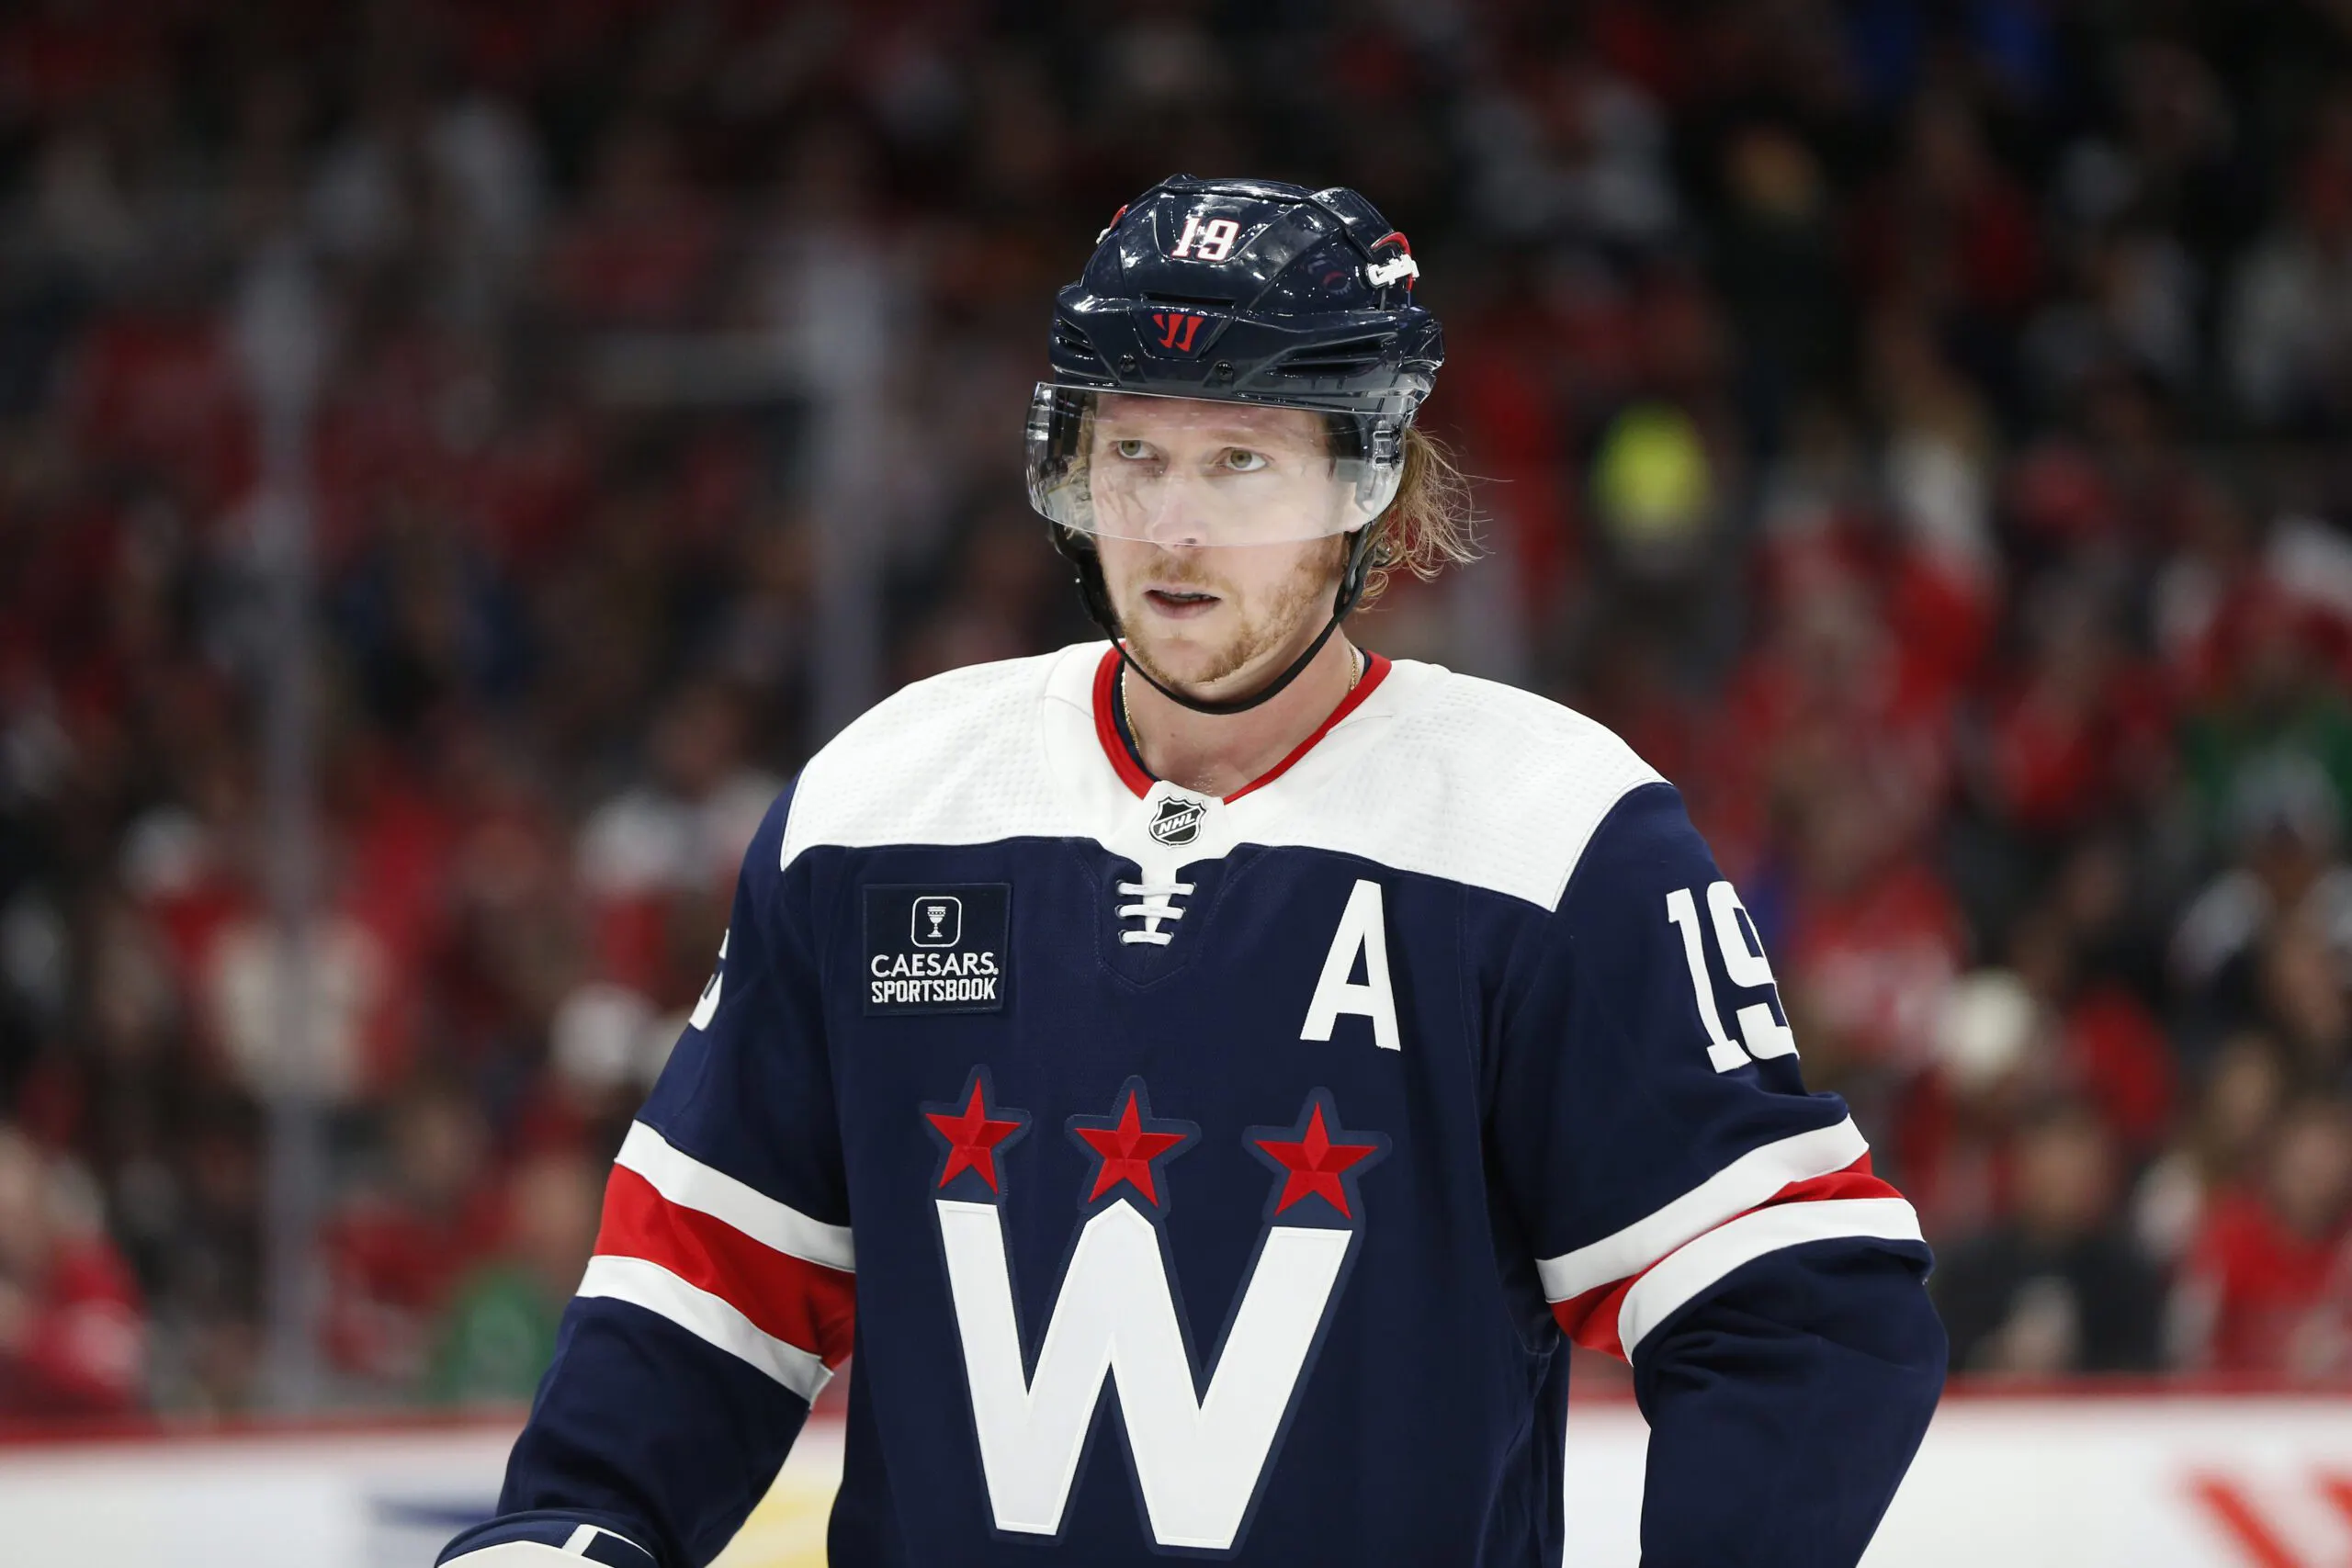 Washington Capitals’ Nicklas Backstrom to step away due to ‘ongoing injury situation’